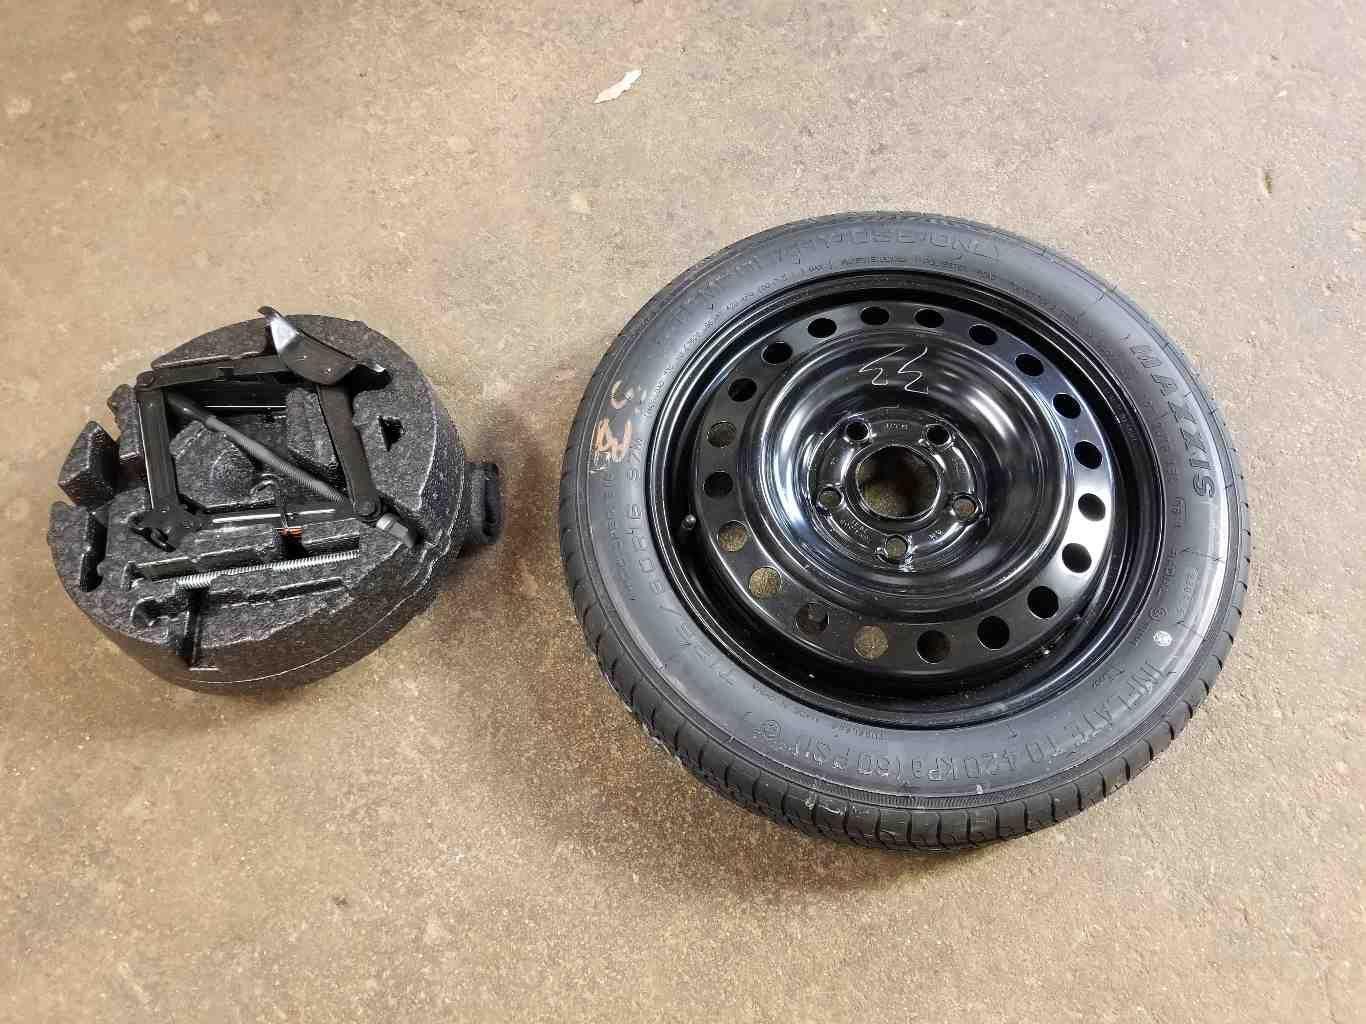 11-13 Buick Regal spare weel tire donut and tool kit oem